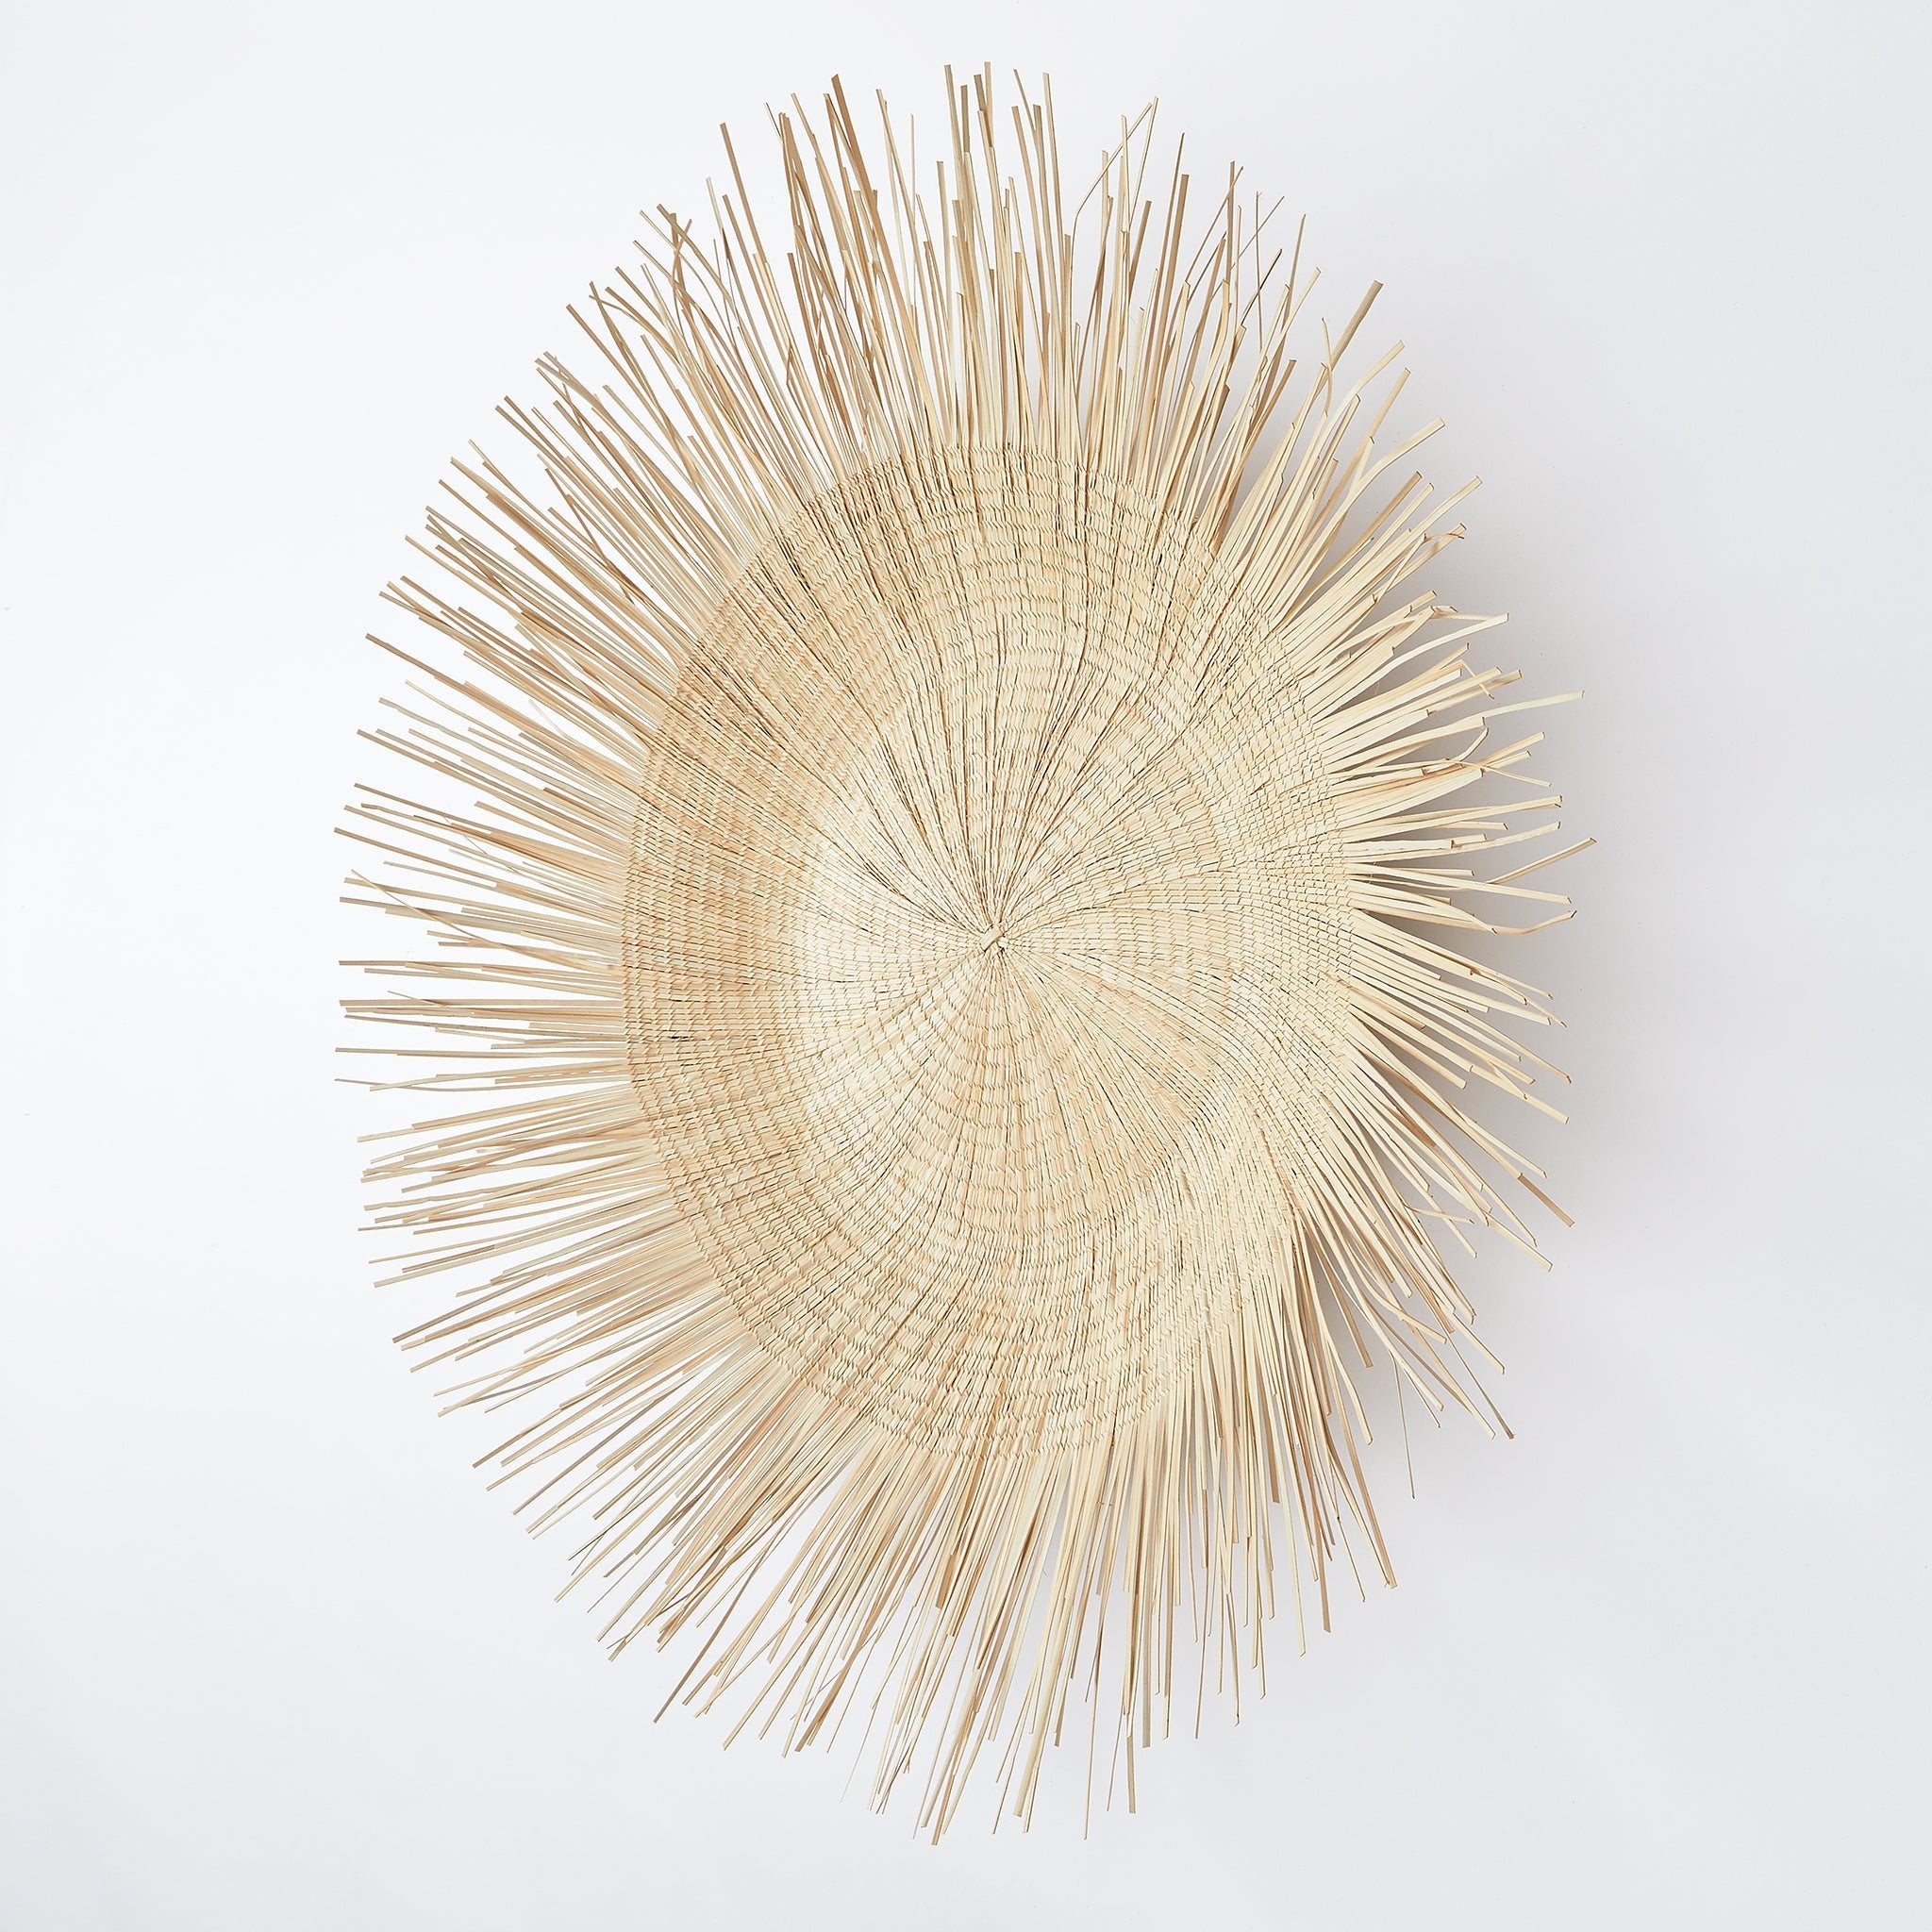 Breathtaking wall art: Sun Plate XL from Malawi. Hand-woven from palm fibres